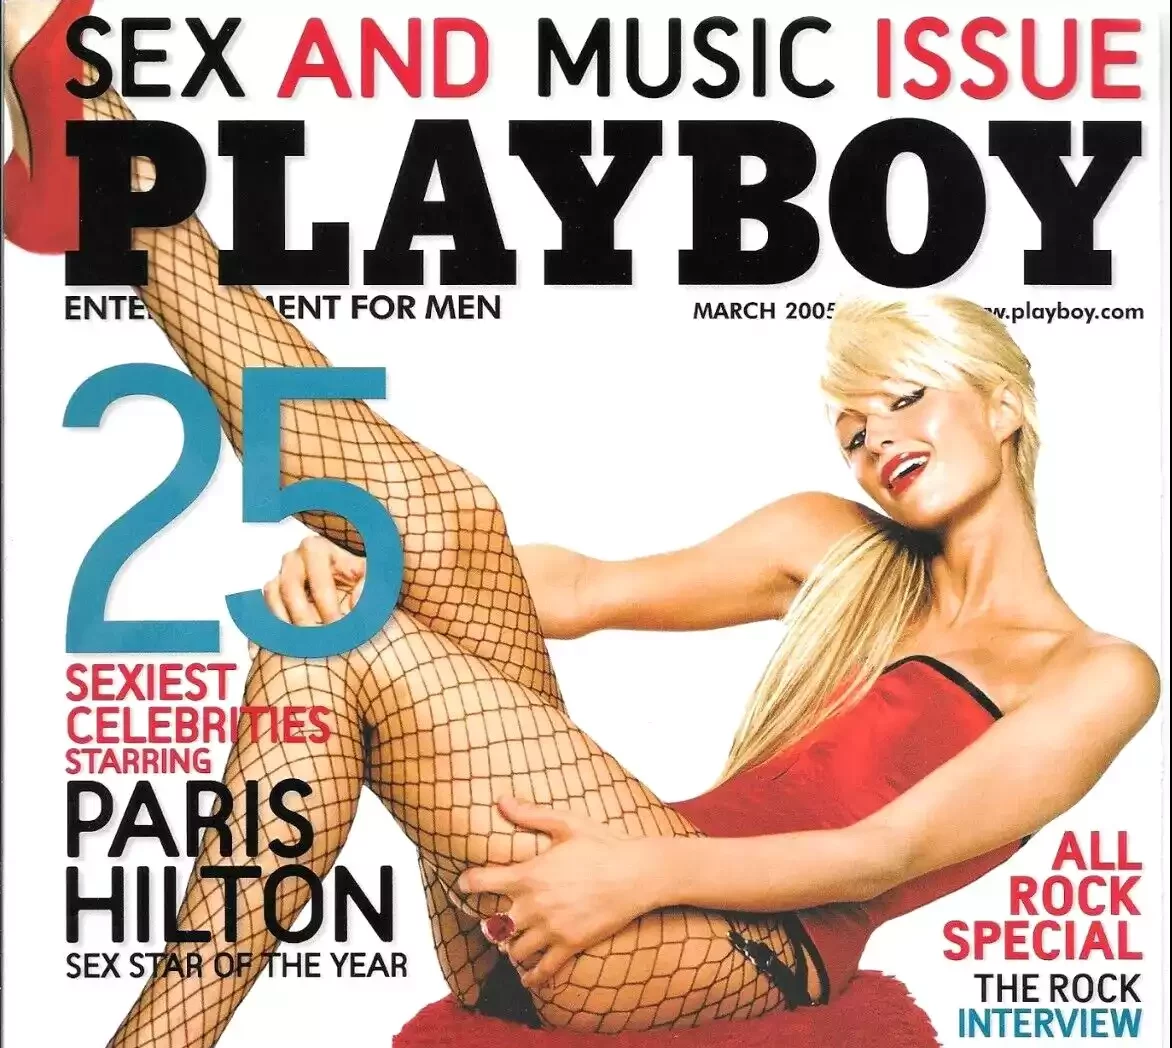 The infamous Playboy magazine cover